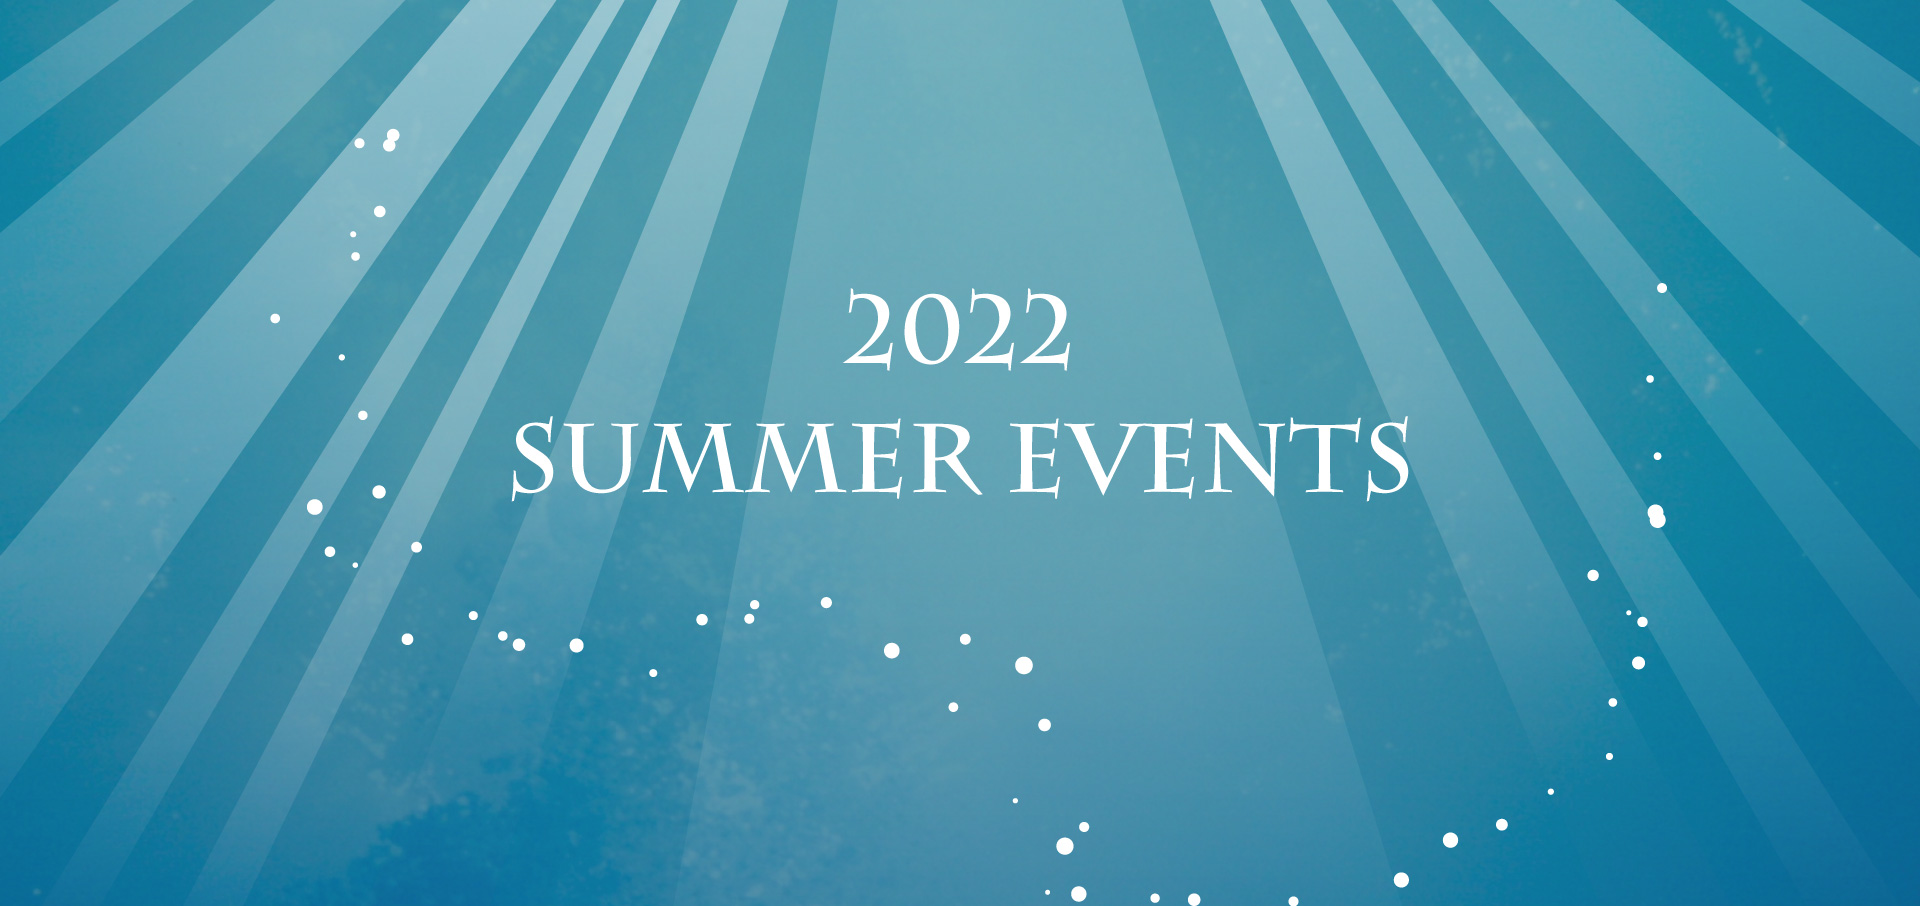 2022 SUMMER EVENTS